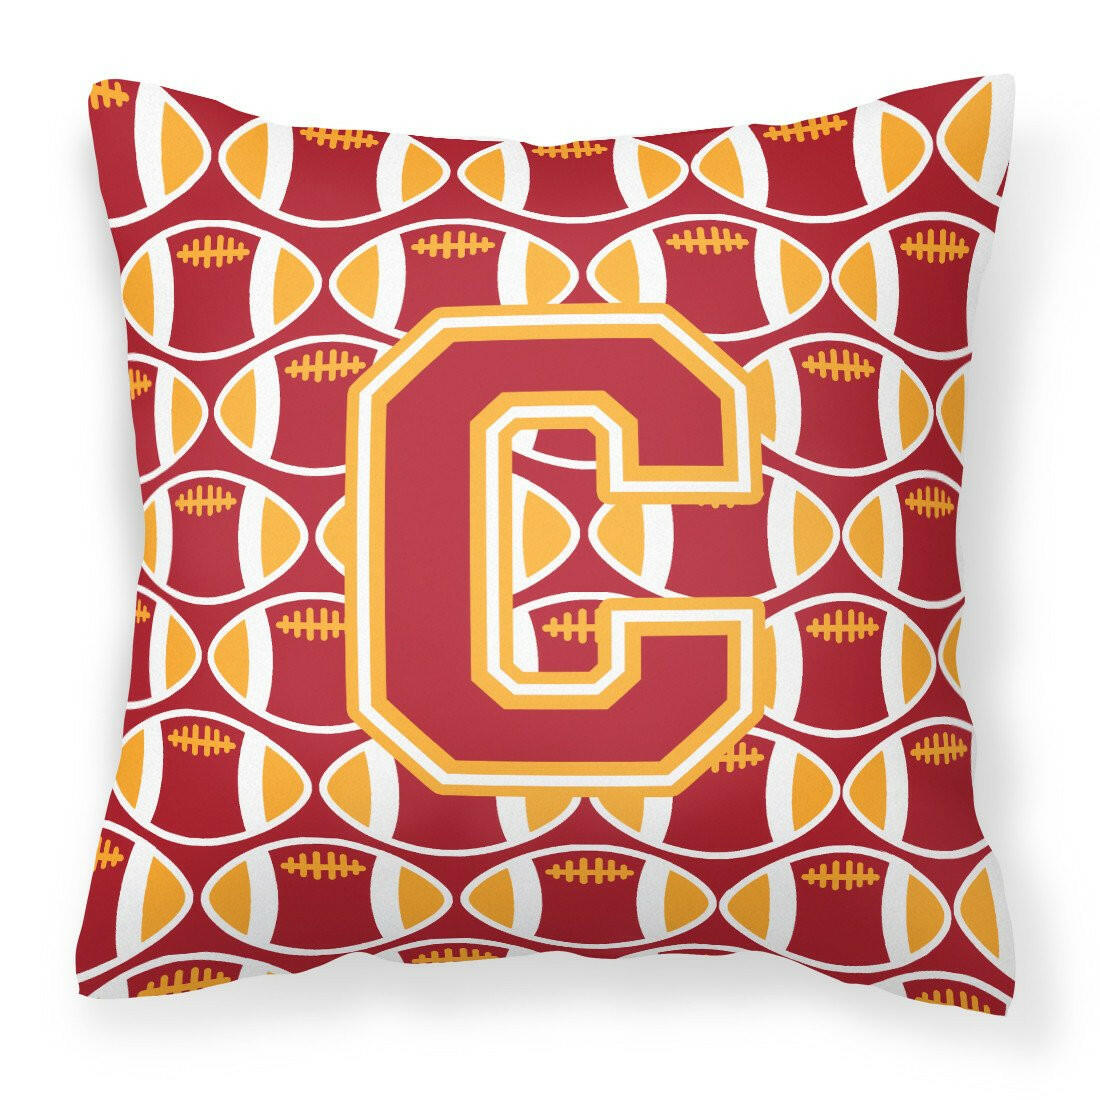 Letter C Football Cardinal and Gold Fabric Decorative Pillow CJ1070-CPW1414 by Caroline's Treasures